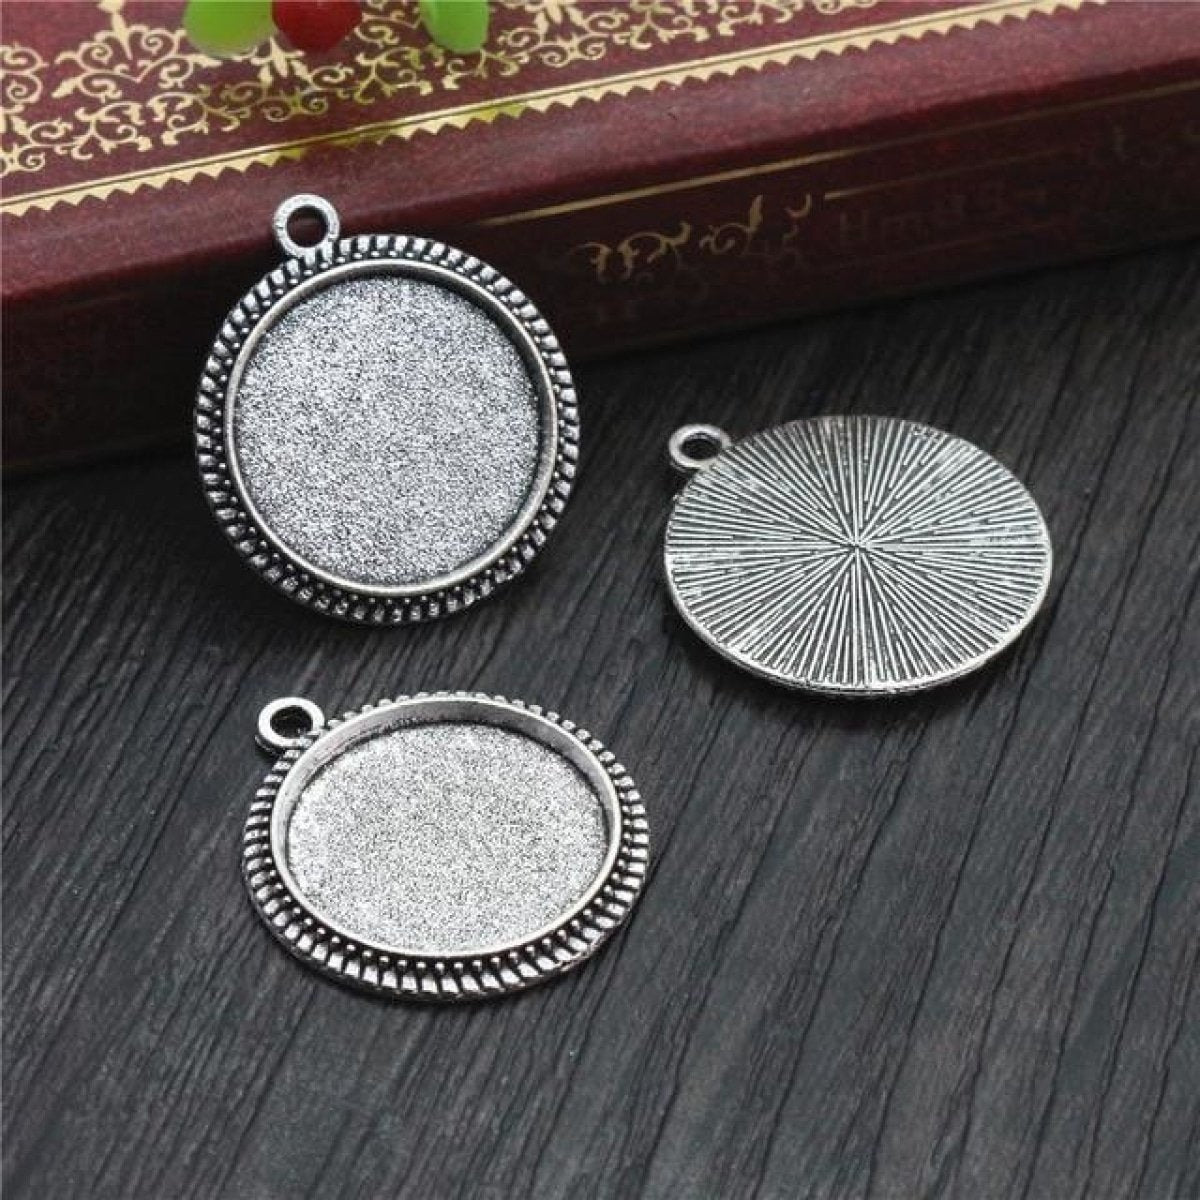 10pcs Cabochon Base 16mm Inner Size Antique Bronze And Silver Colour Metal Cameo Setting Charms Pendant - Antique Silver - - Asia Sell